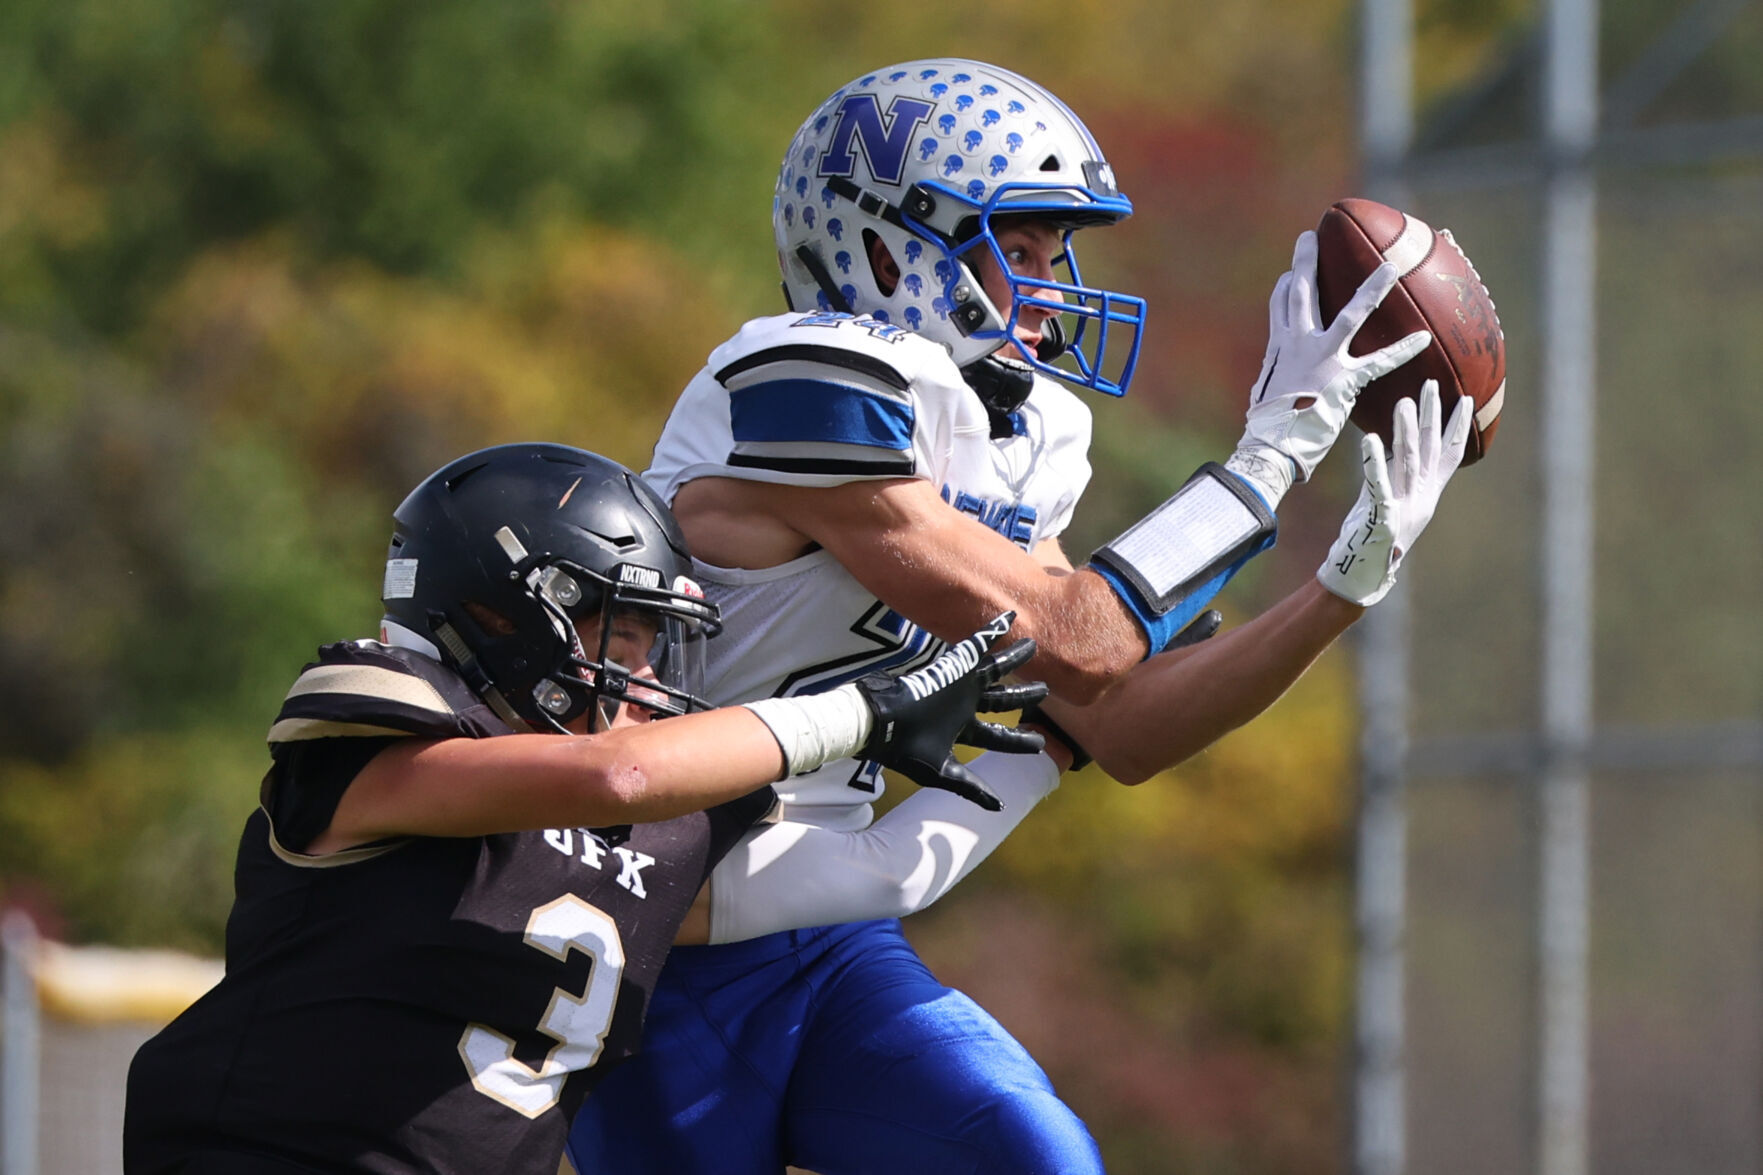 Newfane Football: One Win Away from Third League Title in 30 Years